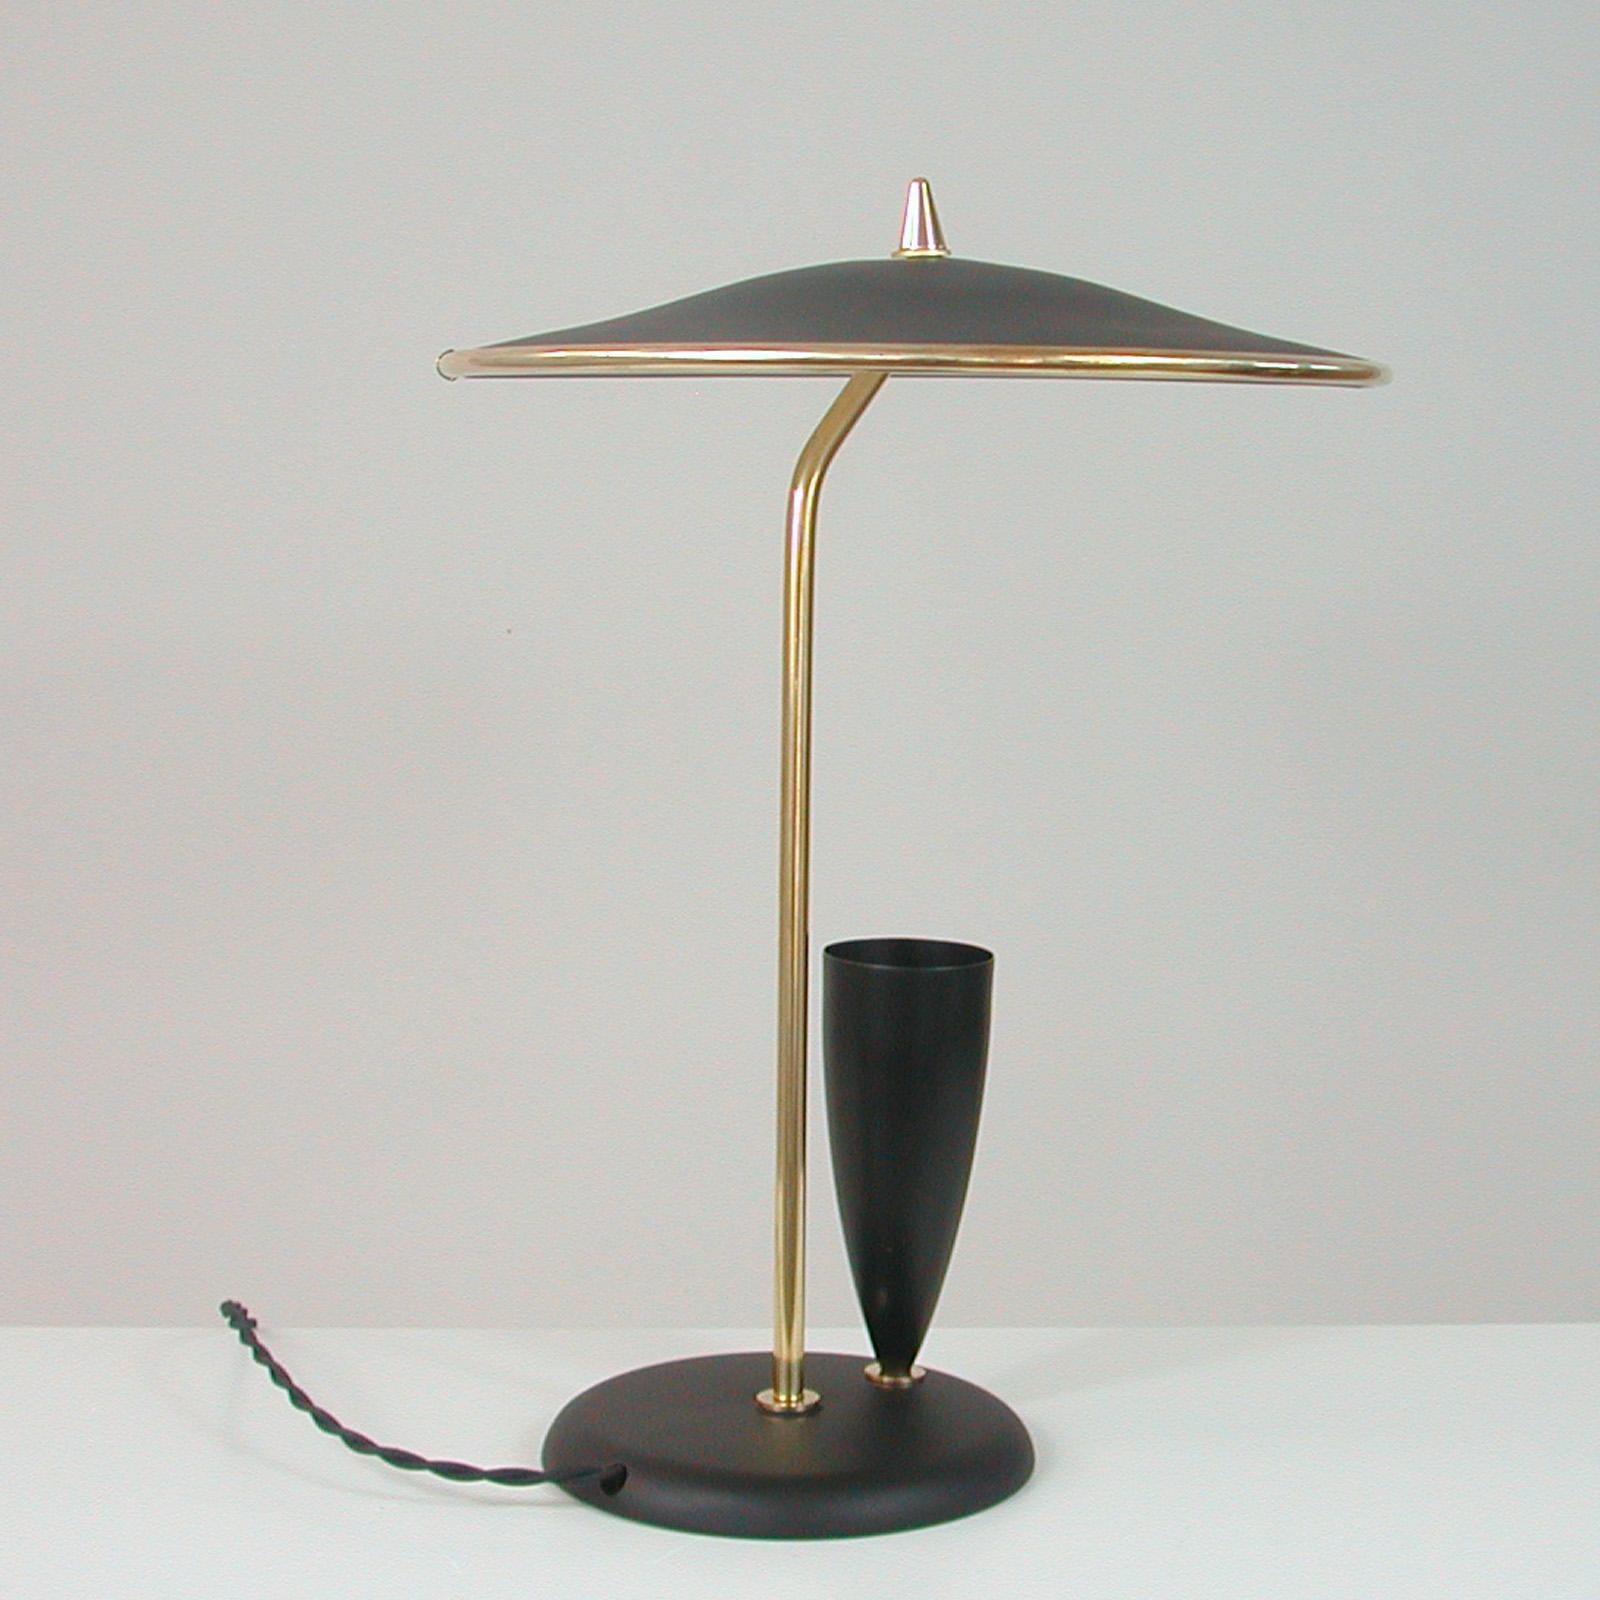 French Midcentury Reflecting Black and Brass Table Lamp, 1950s For Sale 1